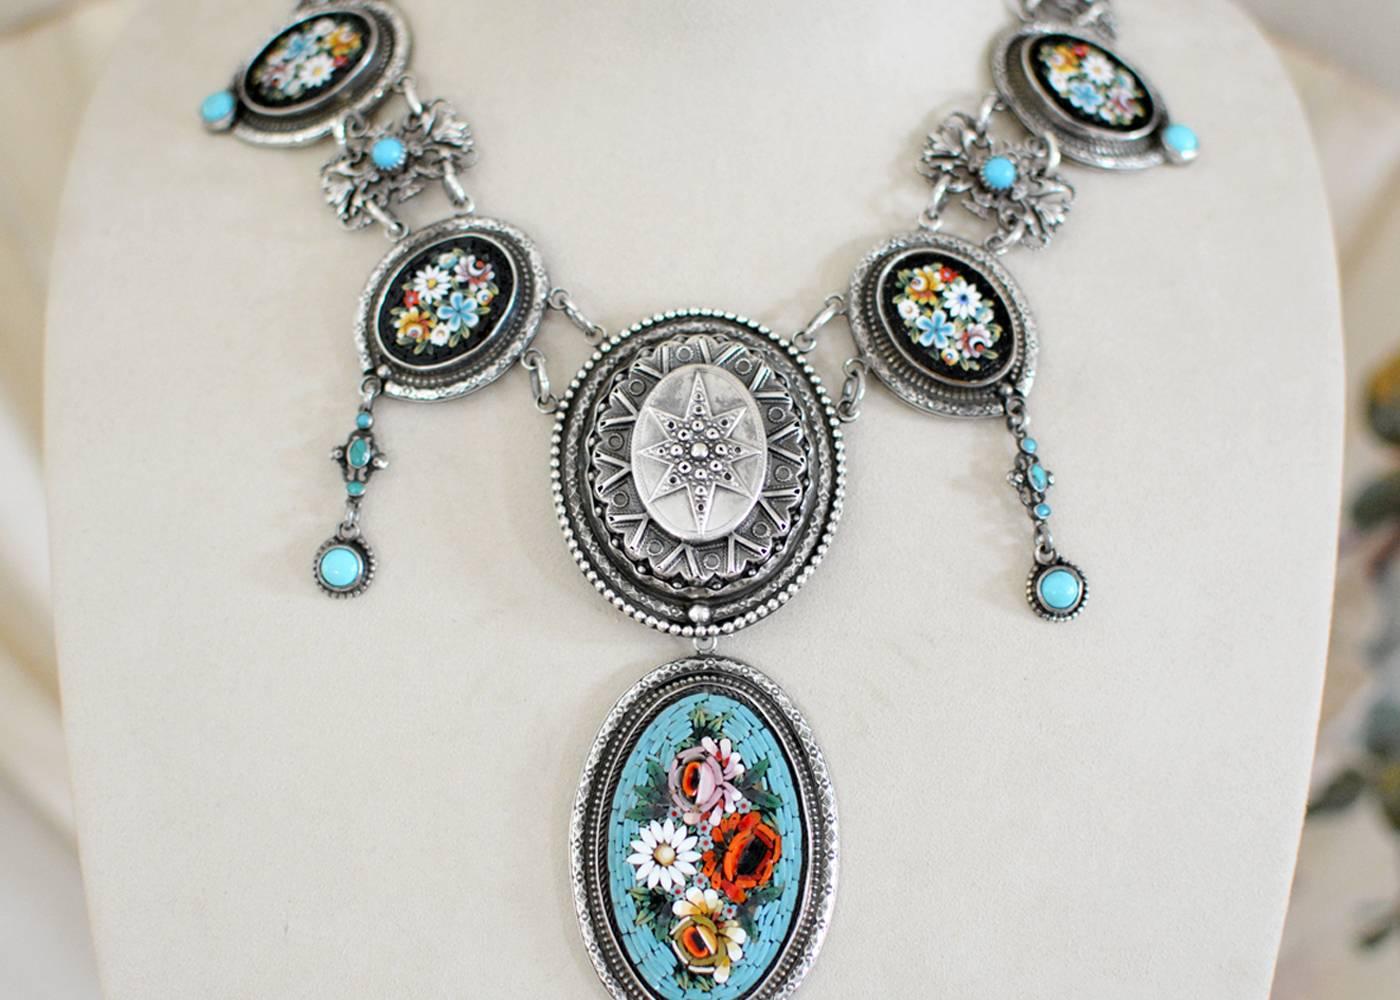 This one of a kind Elizabethan inspired drop necklace with turquoise festoons from my Wisdom Collection features an antique sterling oval pendant with highly detailed raised eight point starburst. A two inch robin's egg blue oval micro mosaic